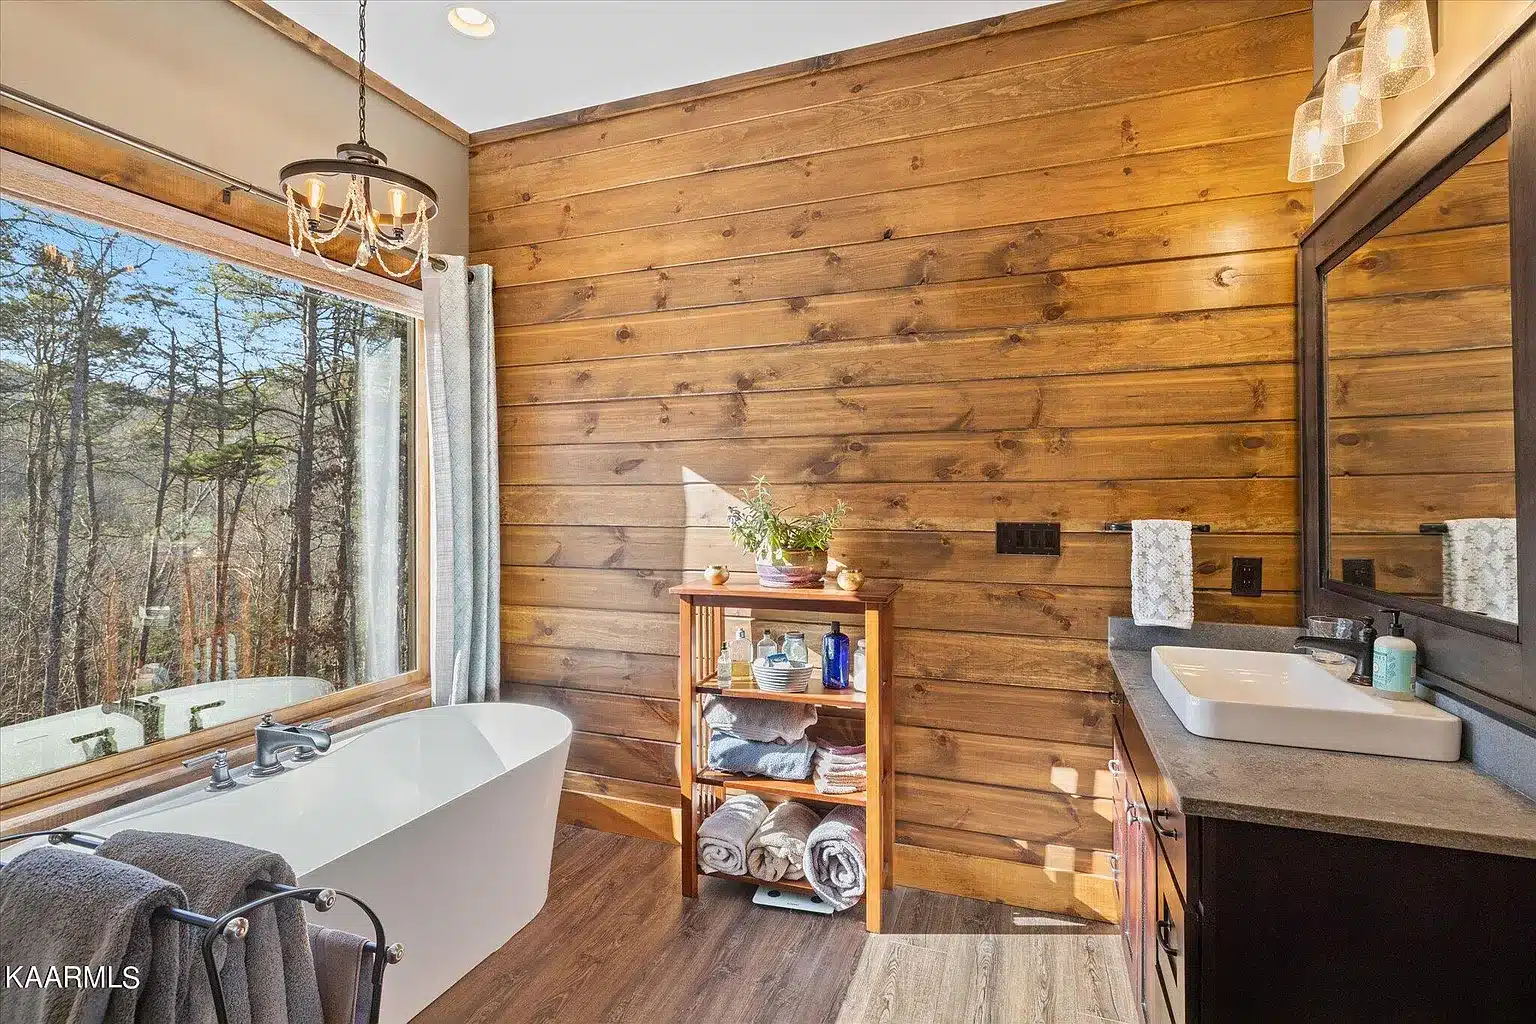 Large Picture framed window at soaker tub with rustic interior siding and chandelier